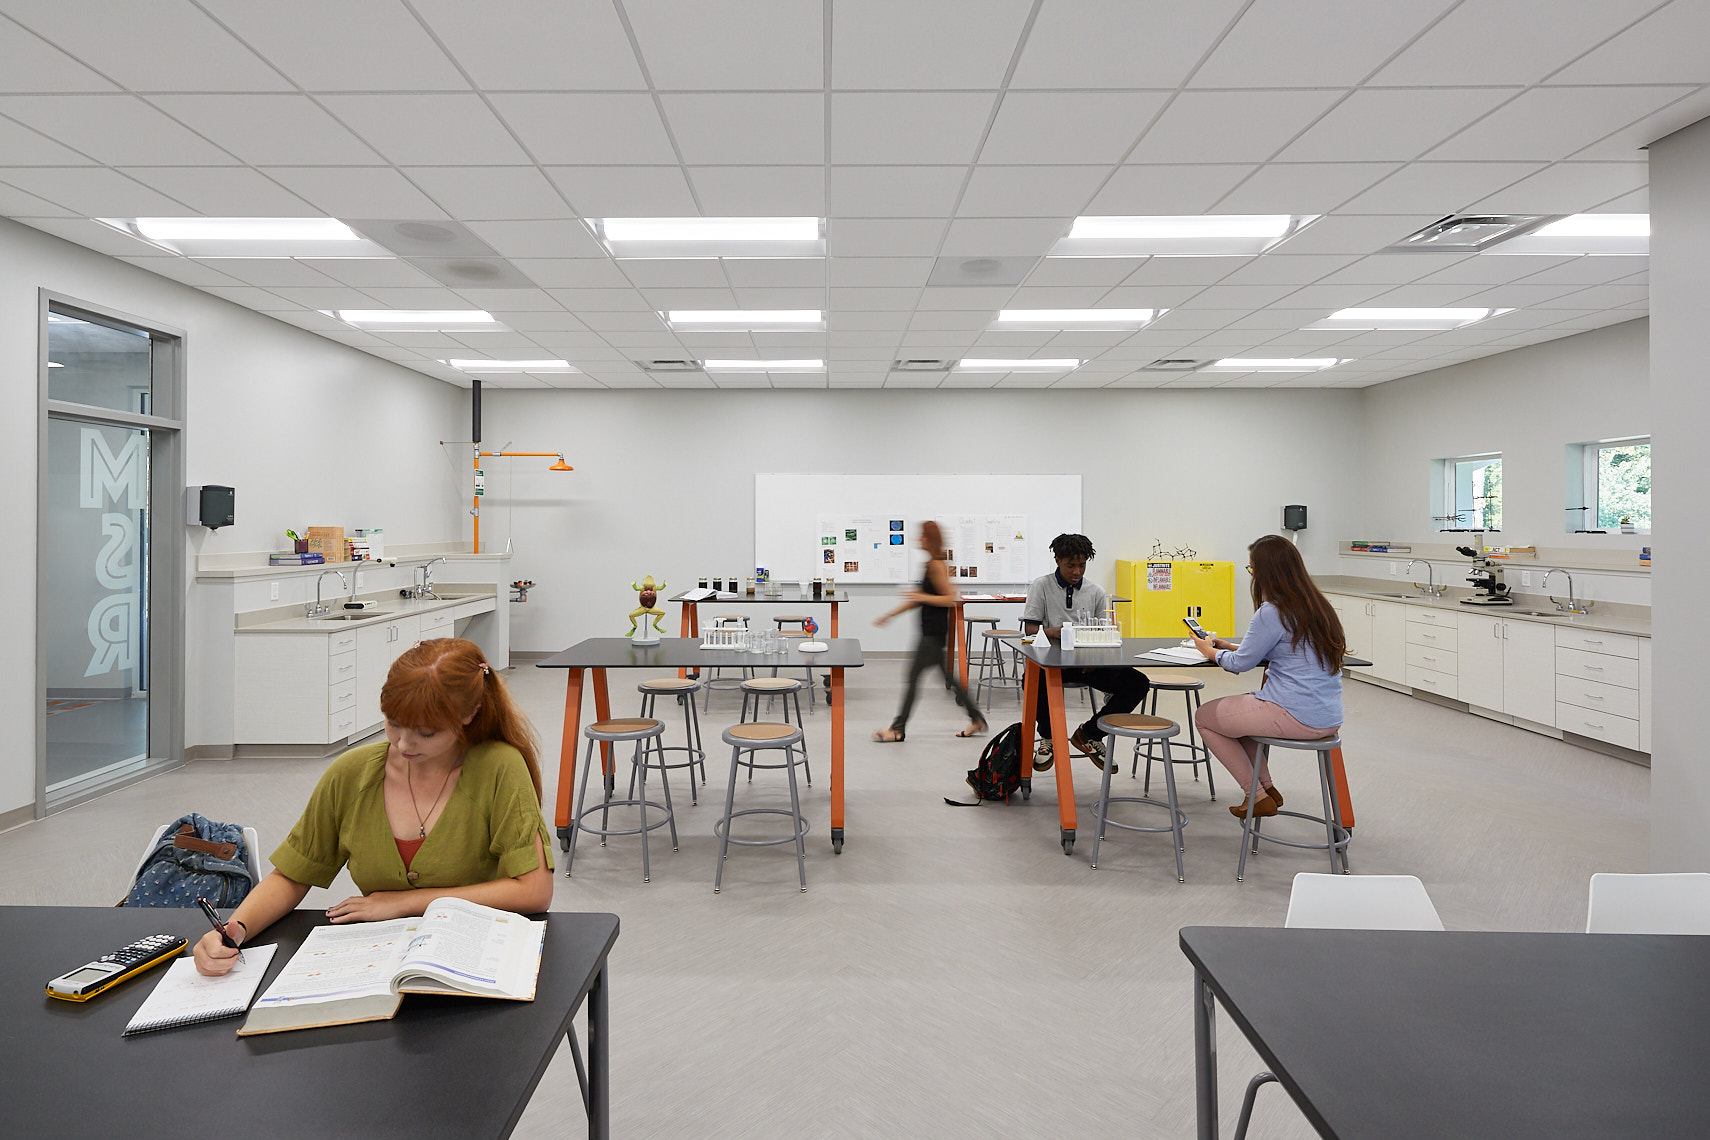 Montessori School Of Raleigh, Raleigh NC - HH Architecture, Raleigh NC